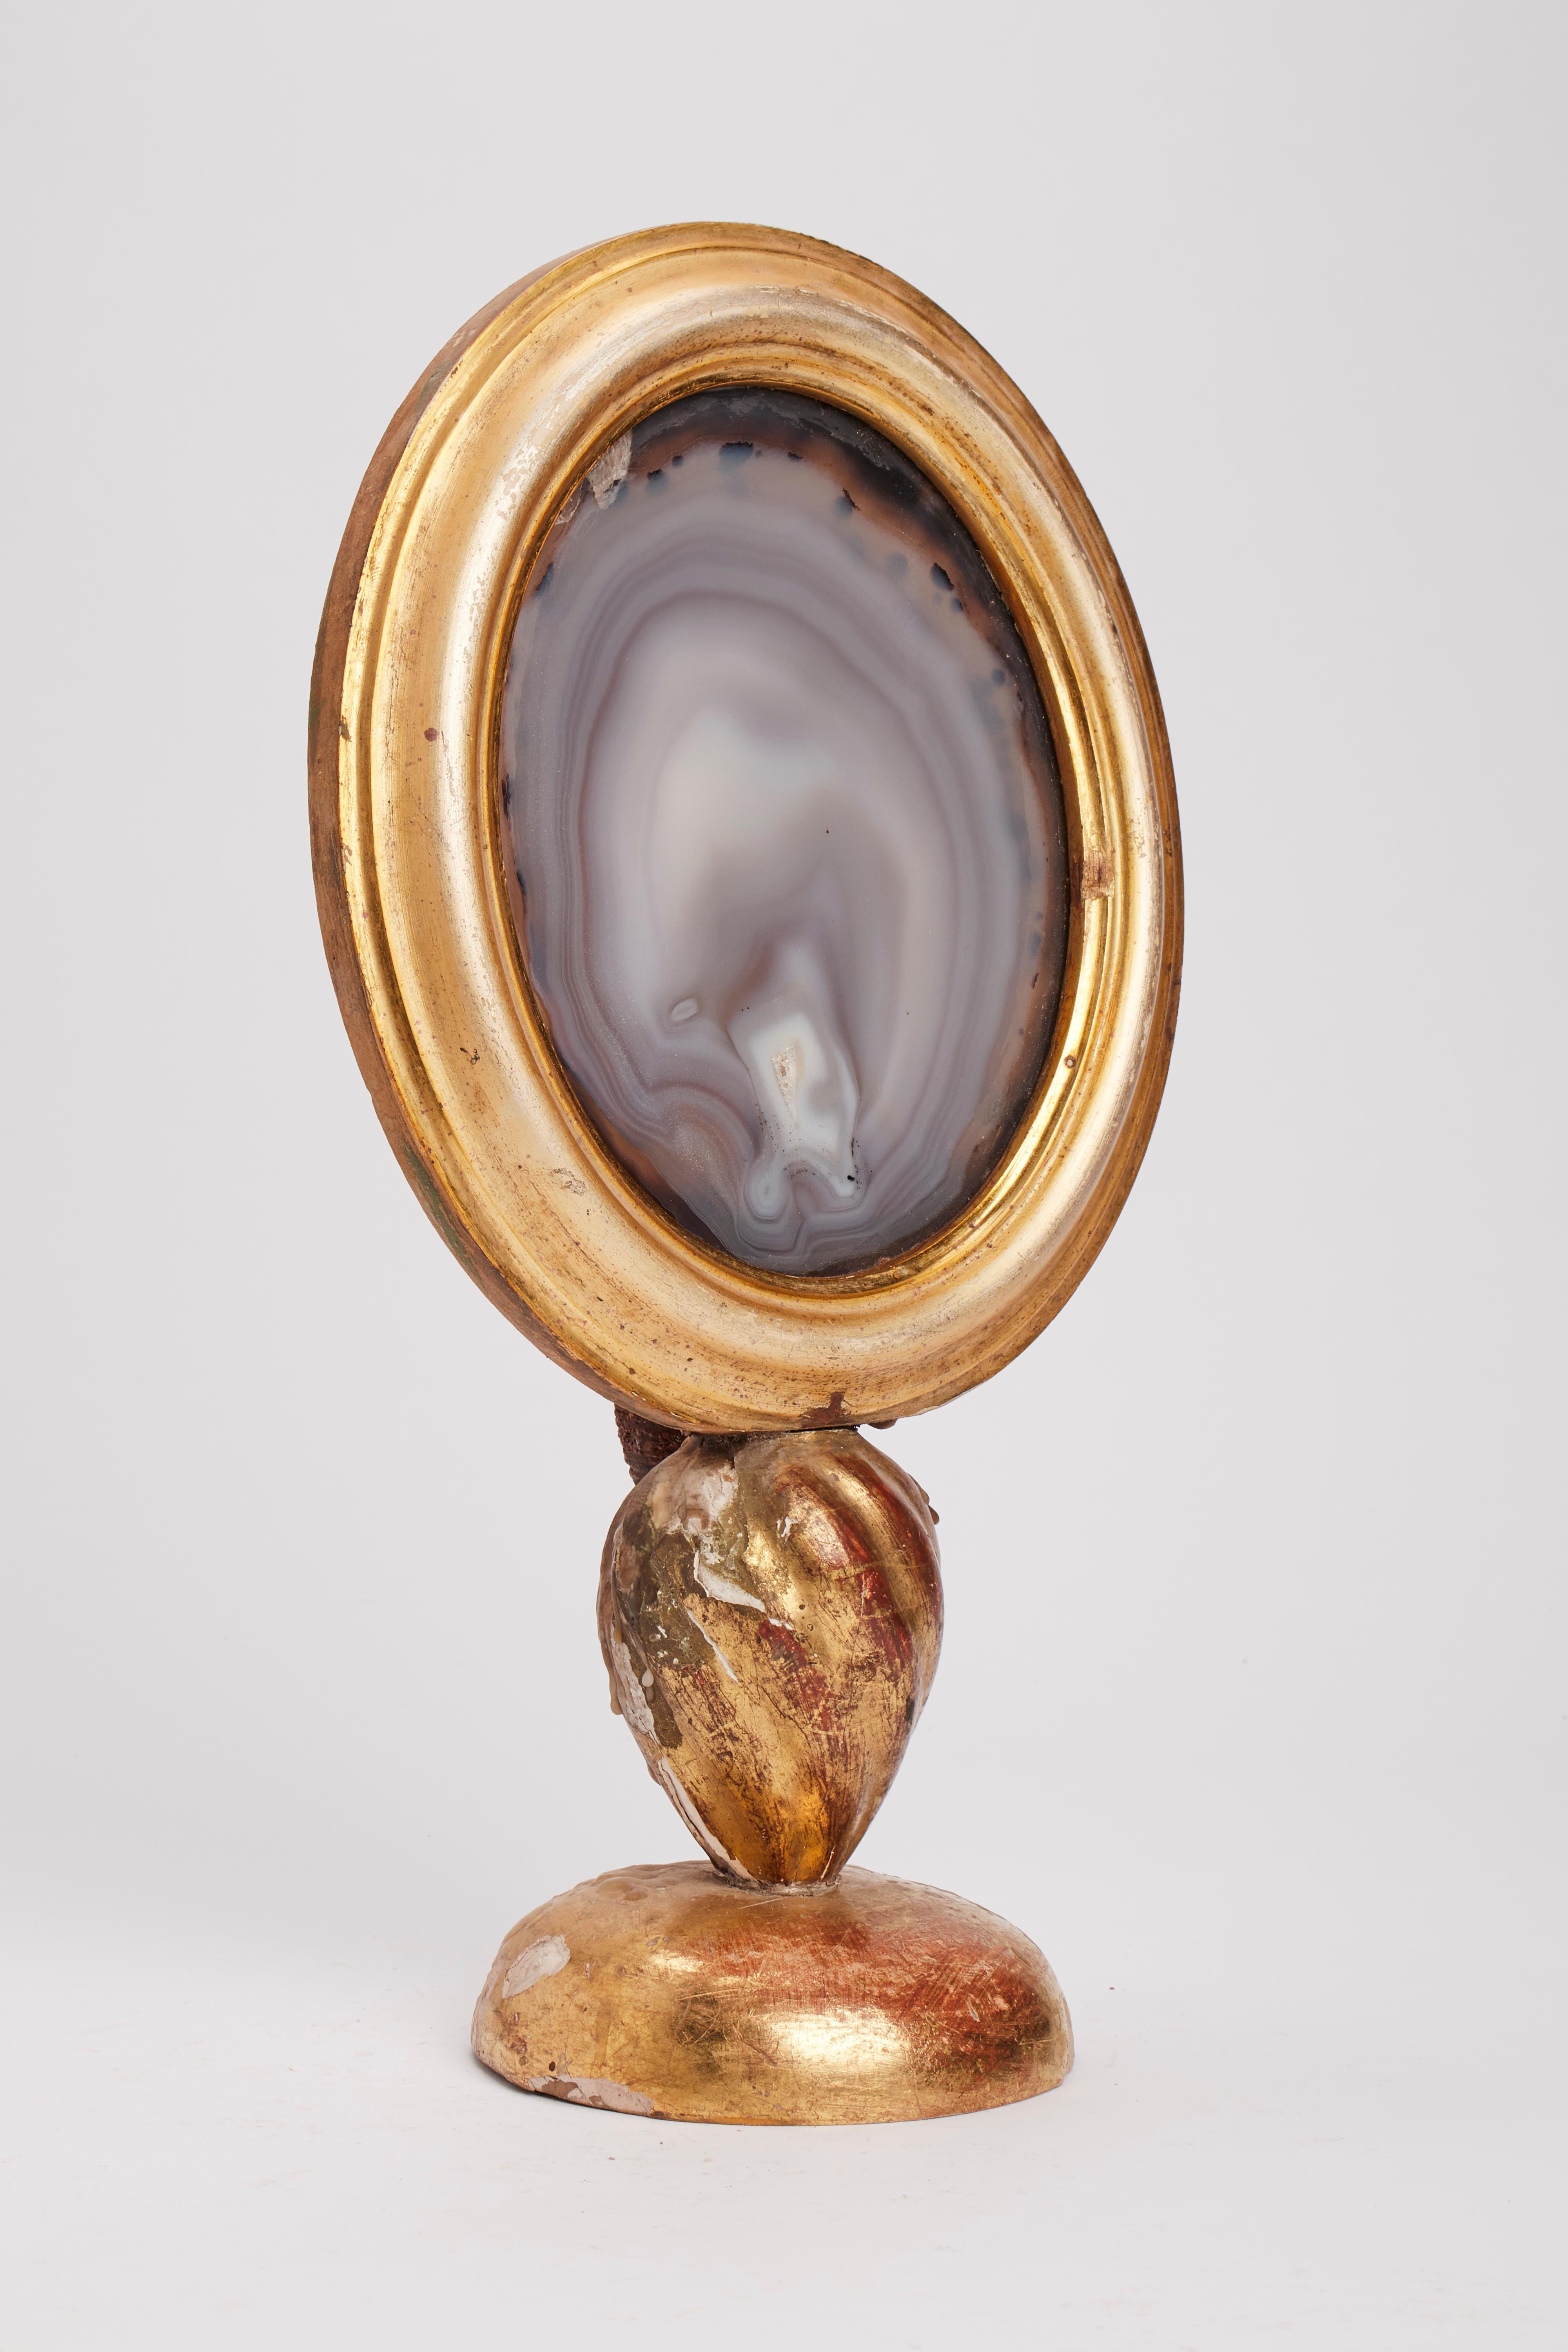 A Wunderkammer naturalia agate specimen mounted in an oval shape frame over a golden wooden base, with a candleholder, Italy, circa 1880.